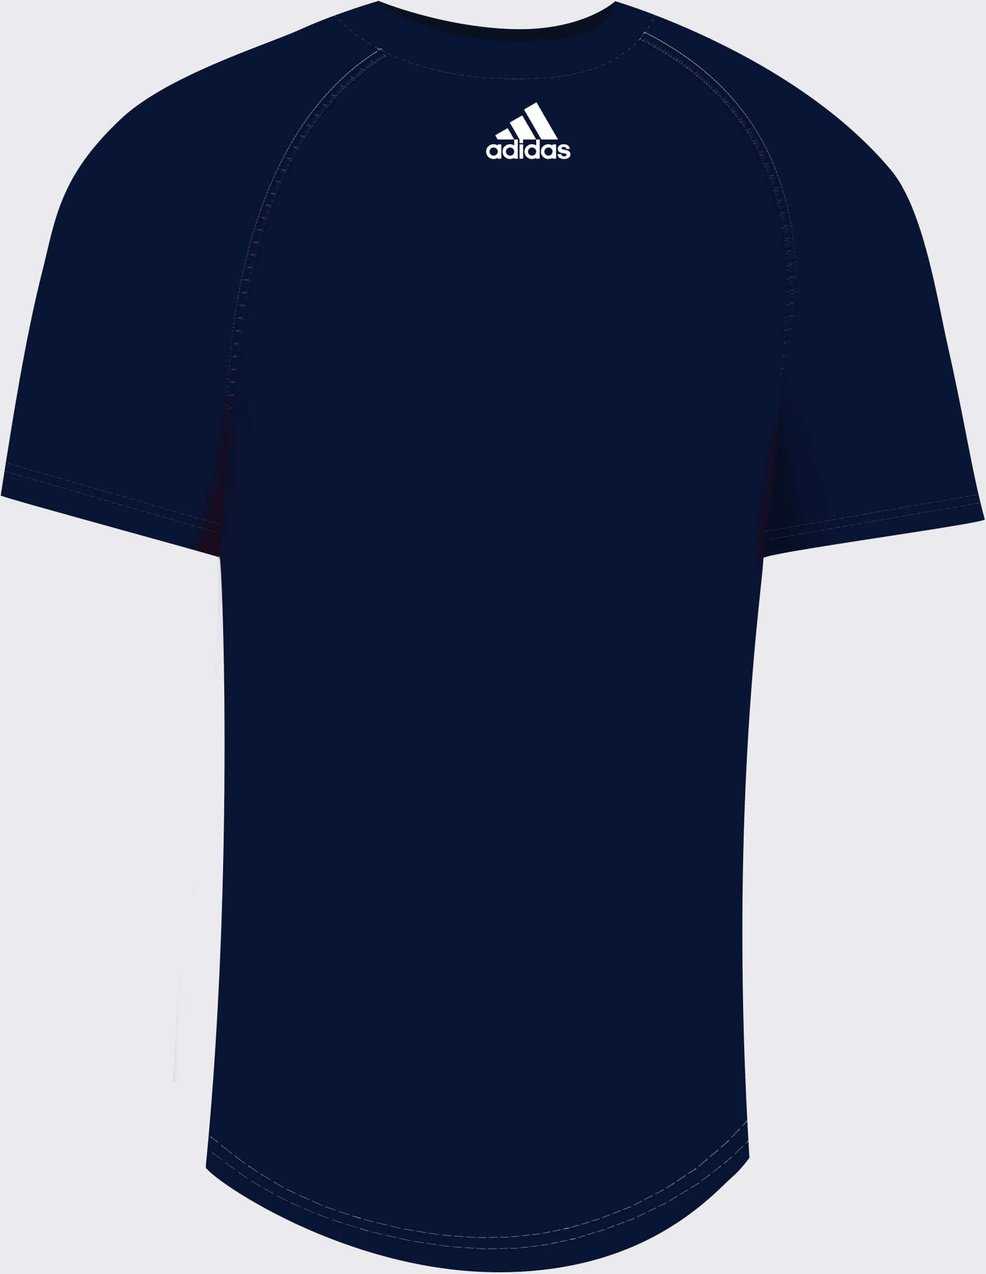 Adidas aA502s Compression Wrestling Shirt - Navy